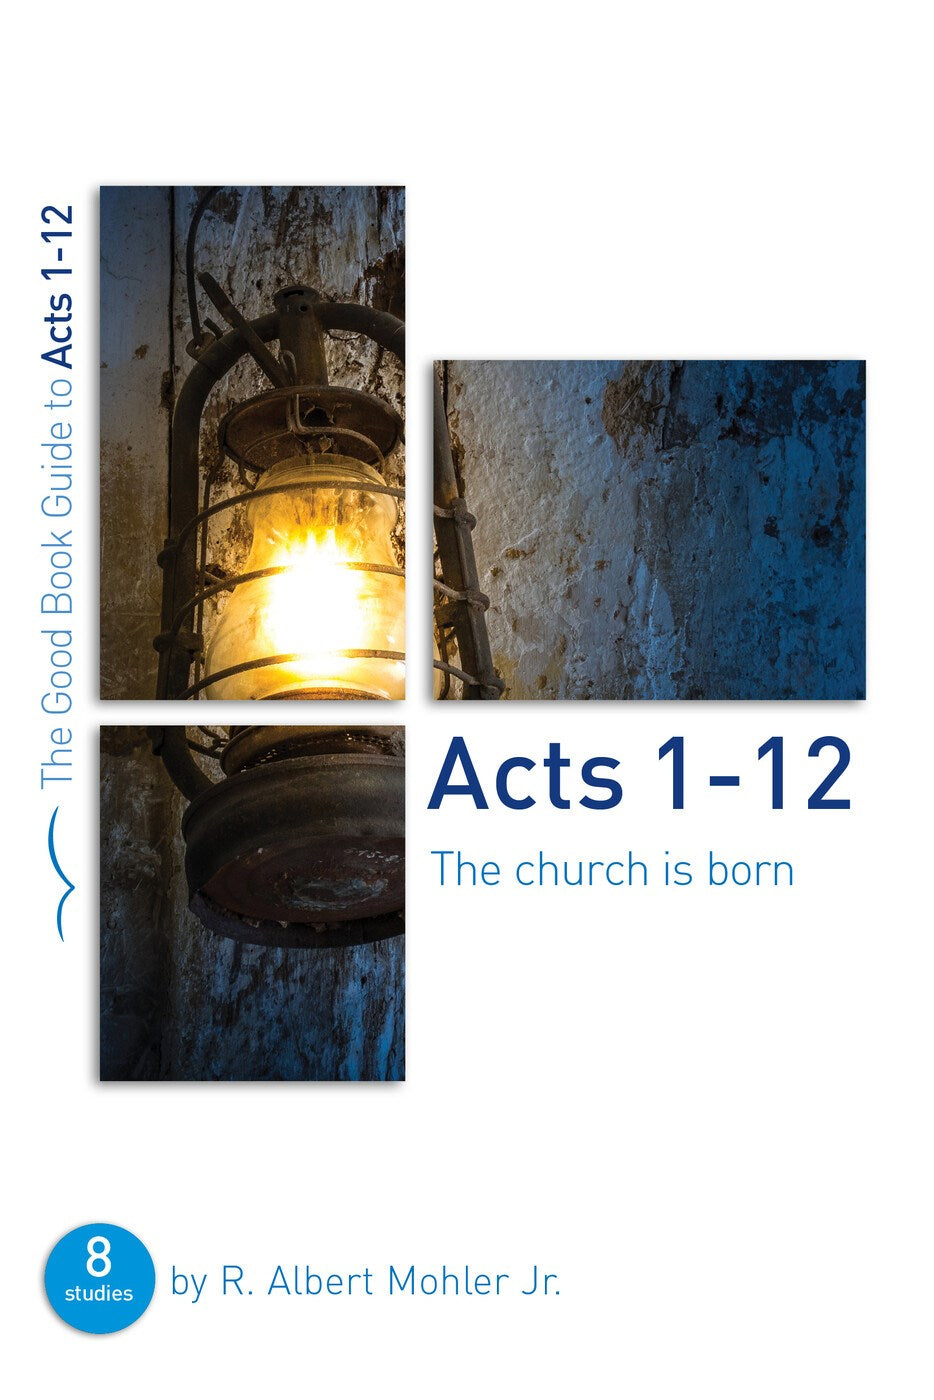 Acts 1-12 (Good Book Guides)